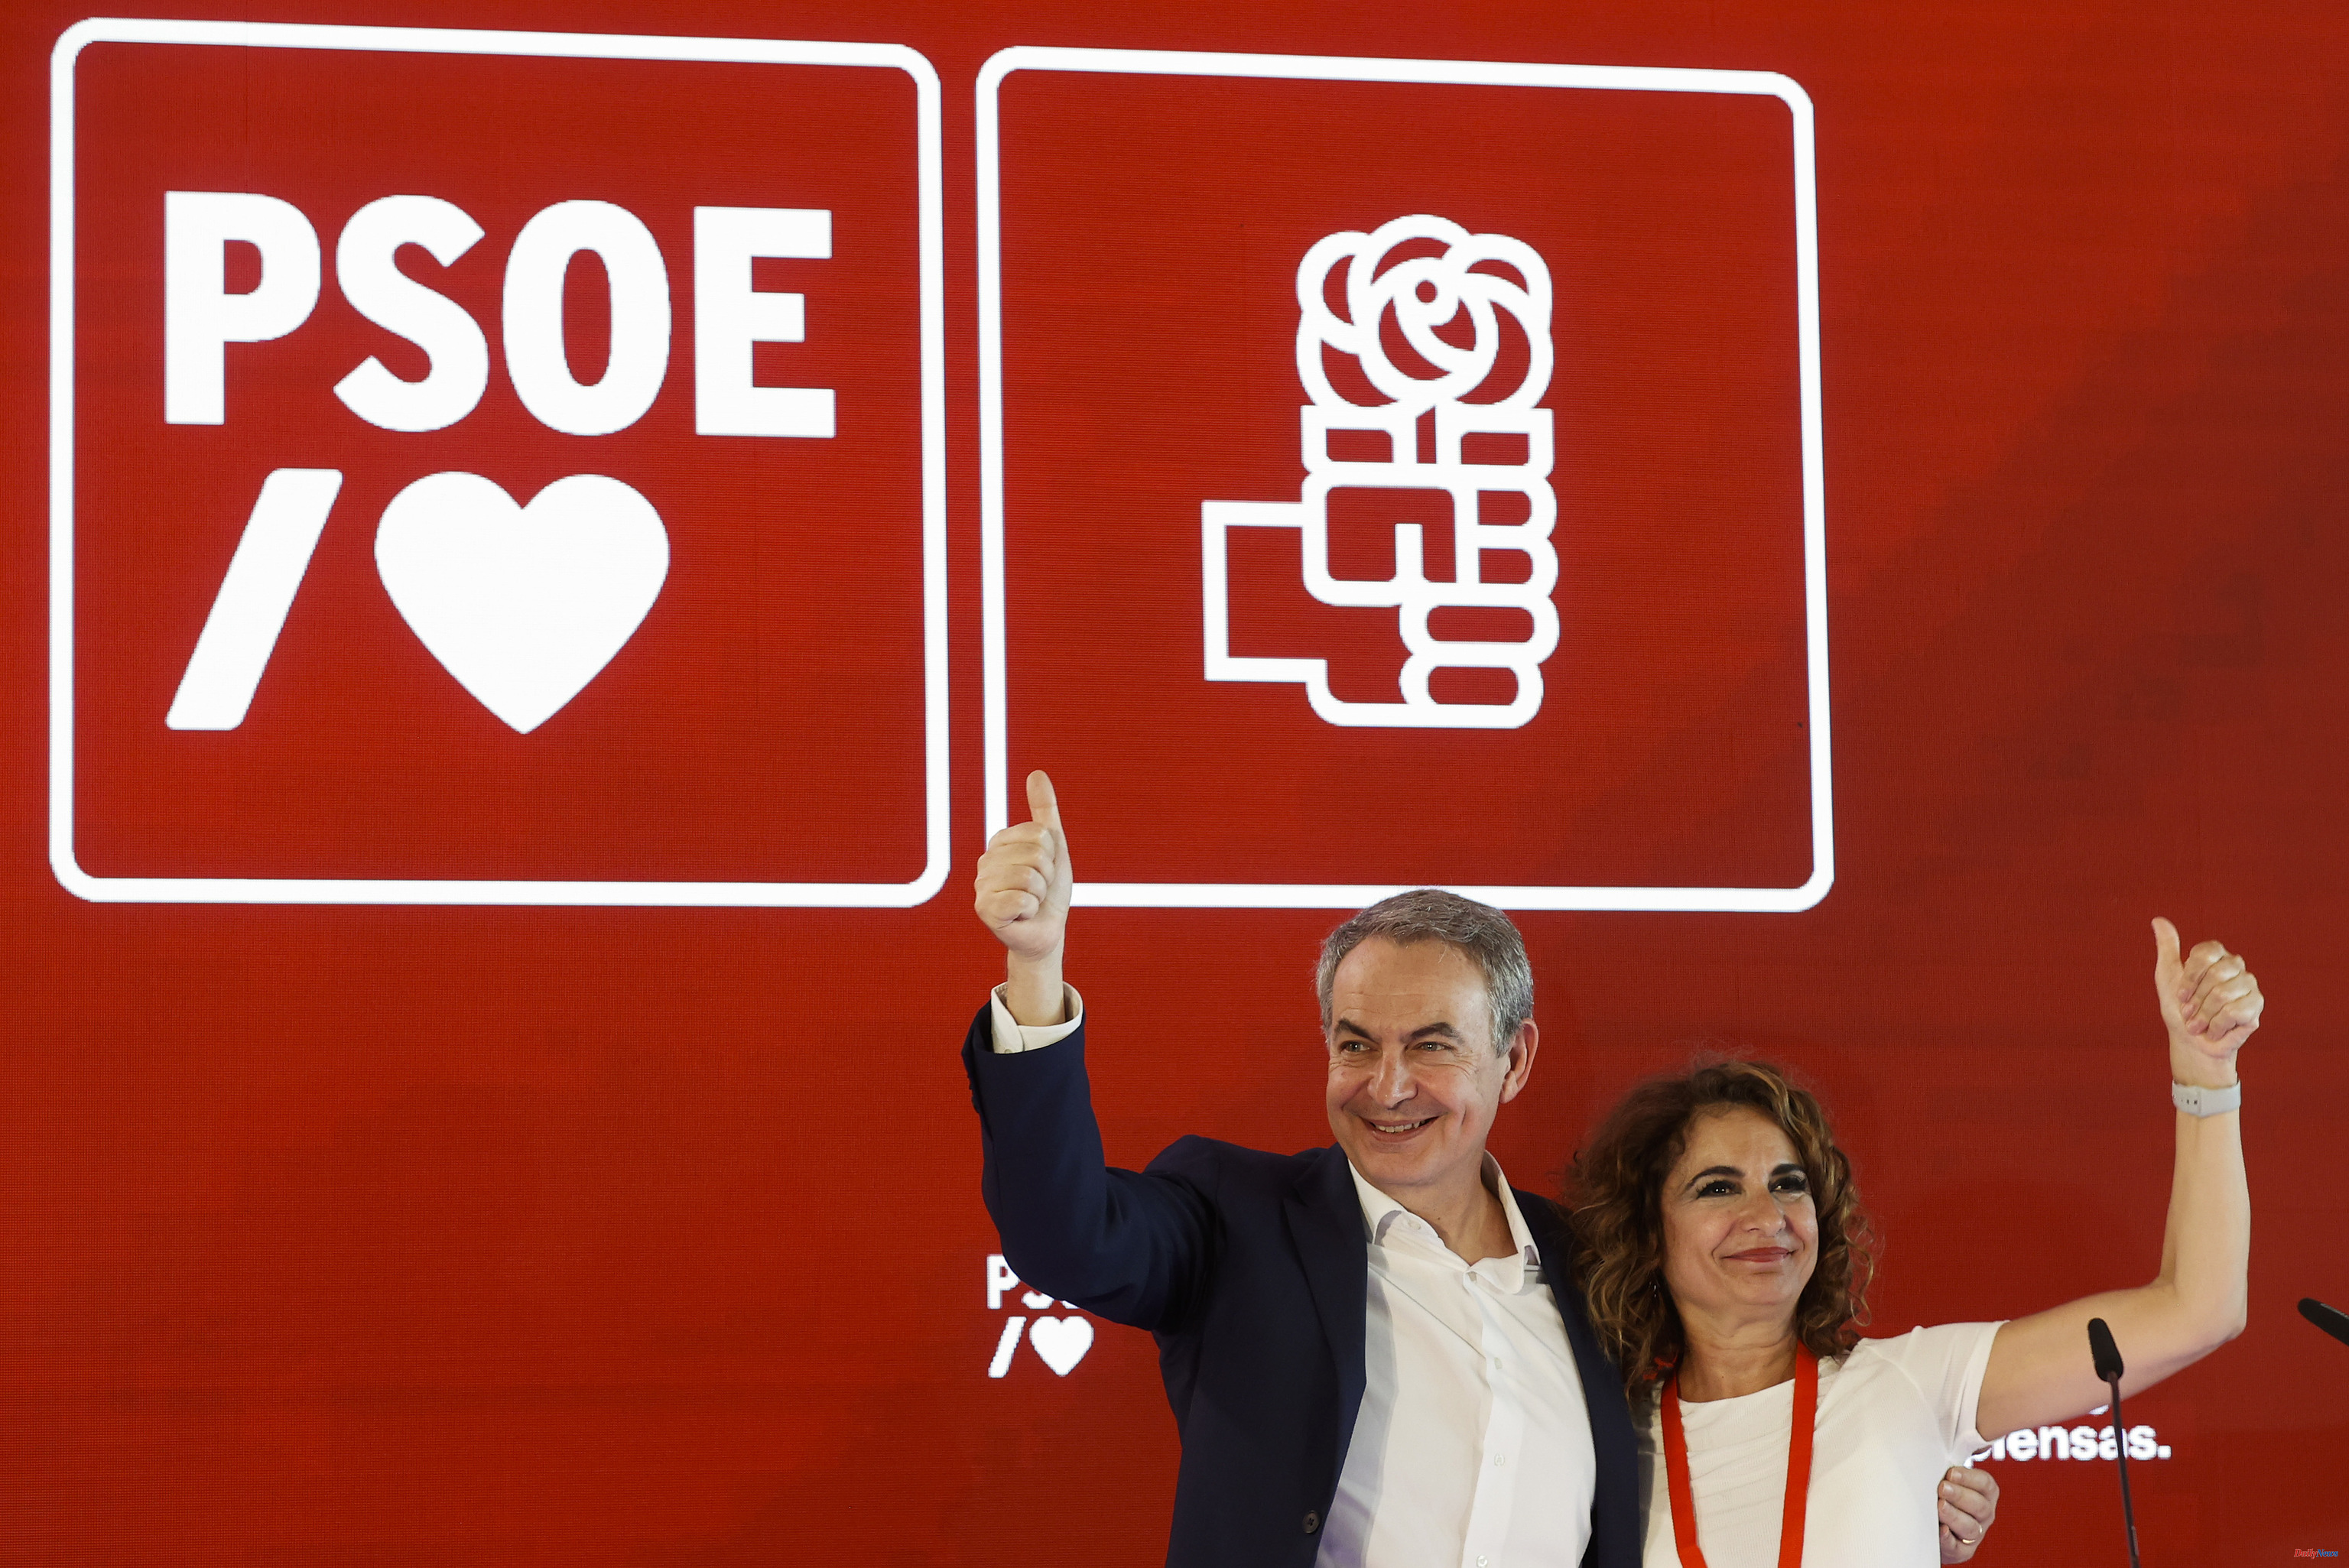 Politics The PSOE warns Podemos that when the parties do not take root "the wave passes and leaves no trace"